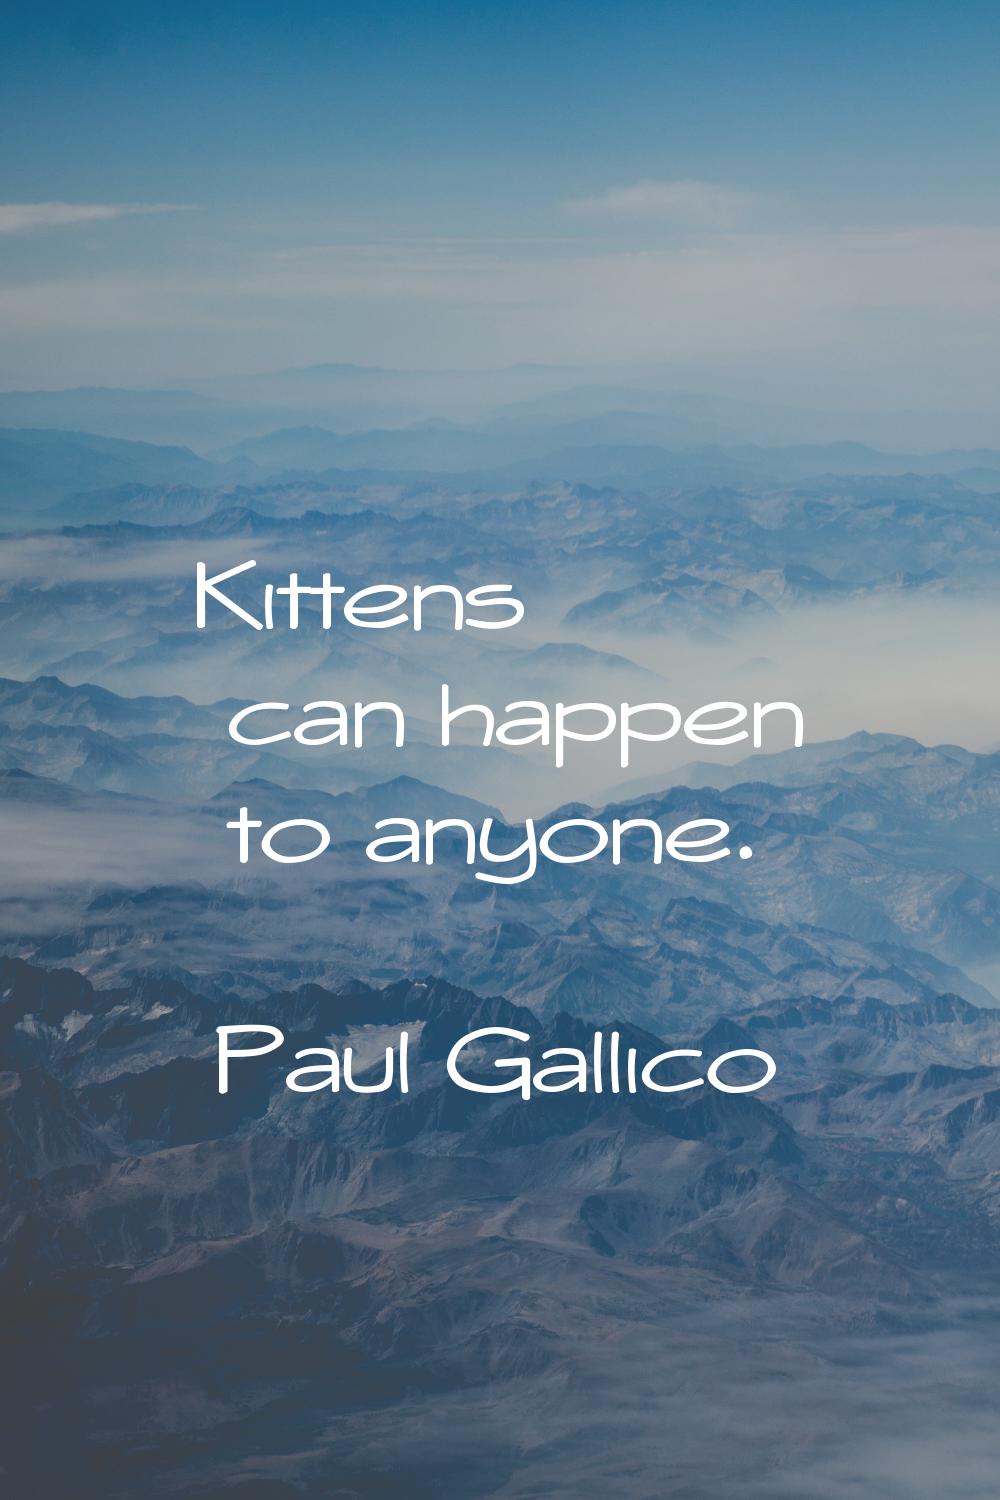 Kittens can happen to anyone.